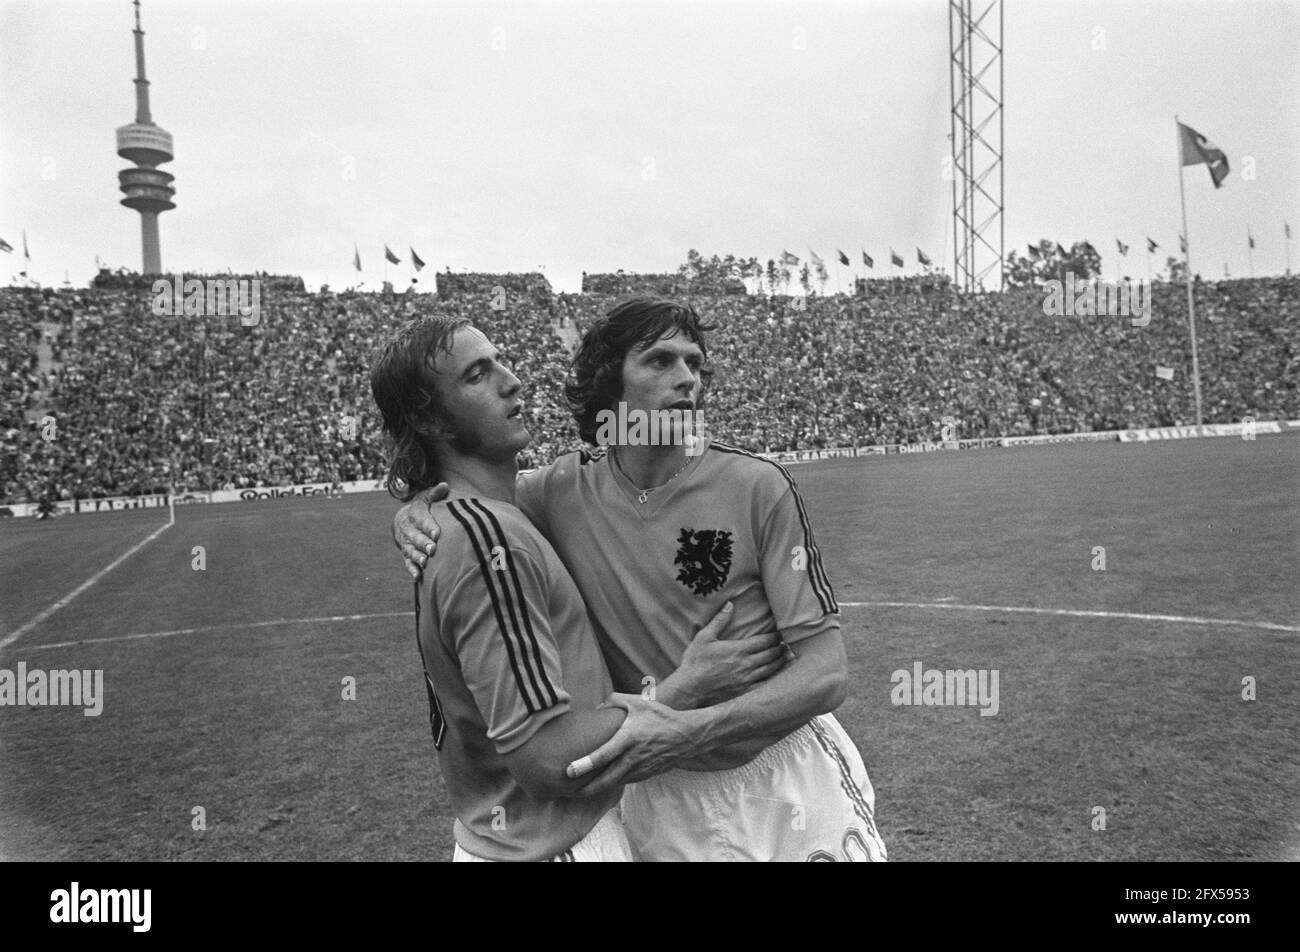 Final World Cup 1974 in Munich, West Germany v Netherlands 2-1; Dutch players leave the field, July 7, 1974, finals, sports, soccer, world championships, The Netherlands, 20th century press agency photo, news to remember, documentary, historic photography 1945-1990, visual stories, human history of the Twentieth Century, capturing moments in time Stock Photo